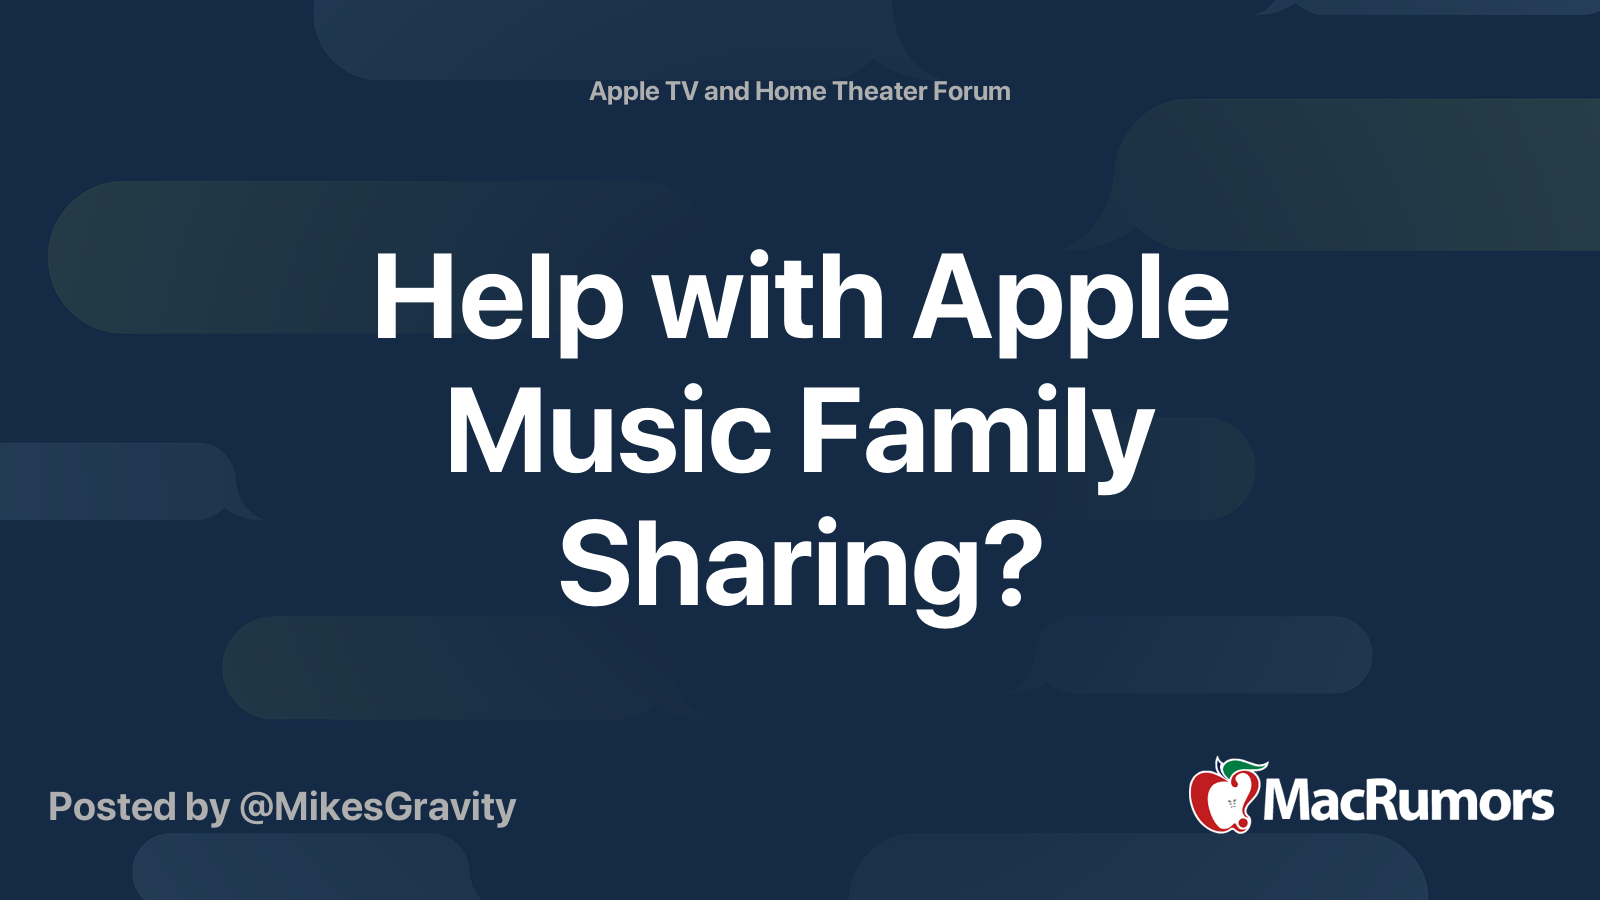 Help with Apple Music Family Sharing?